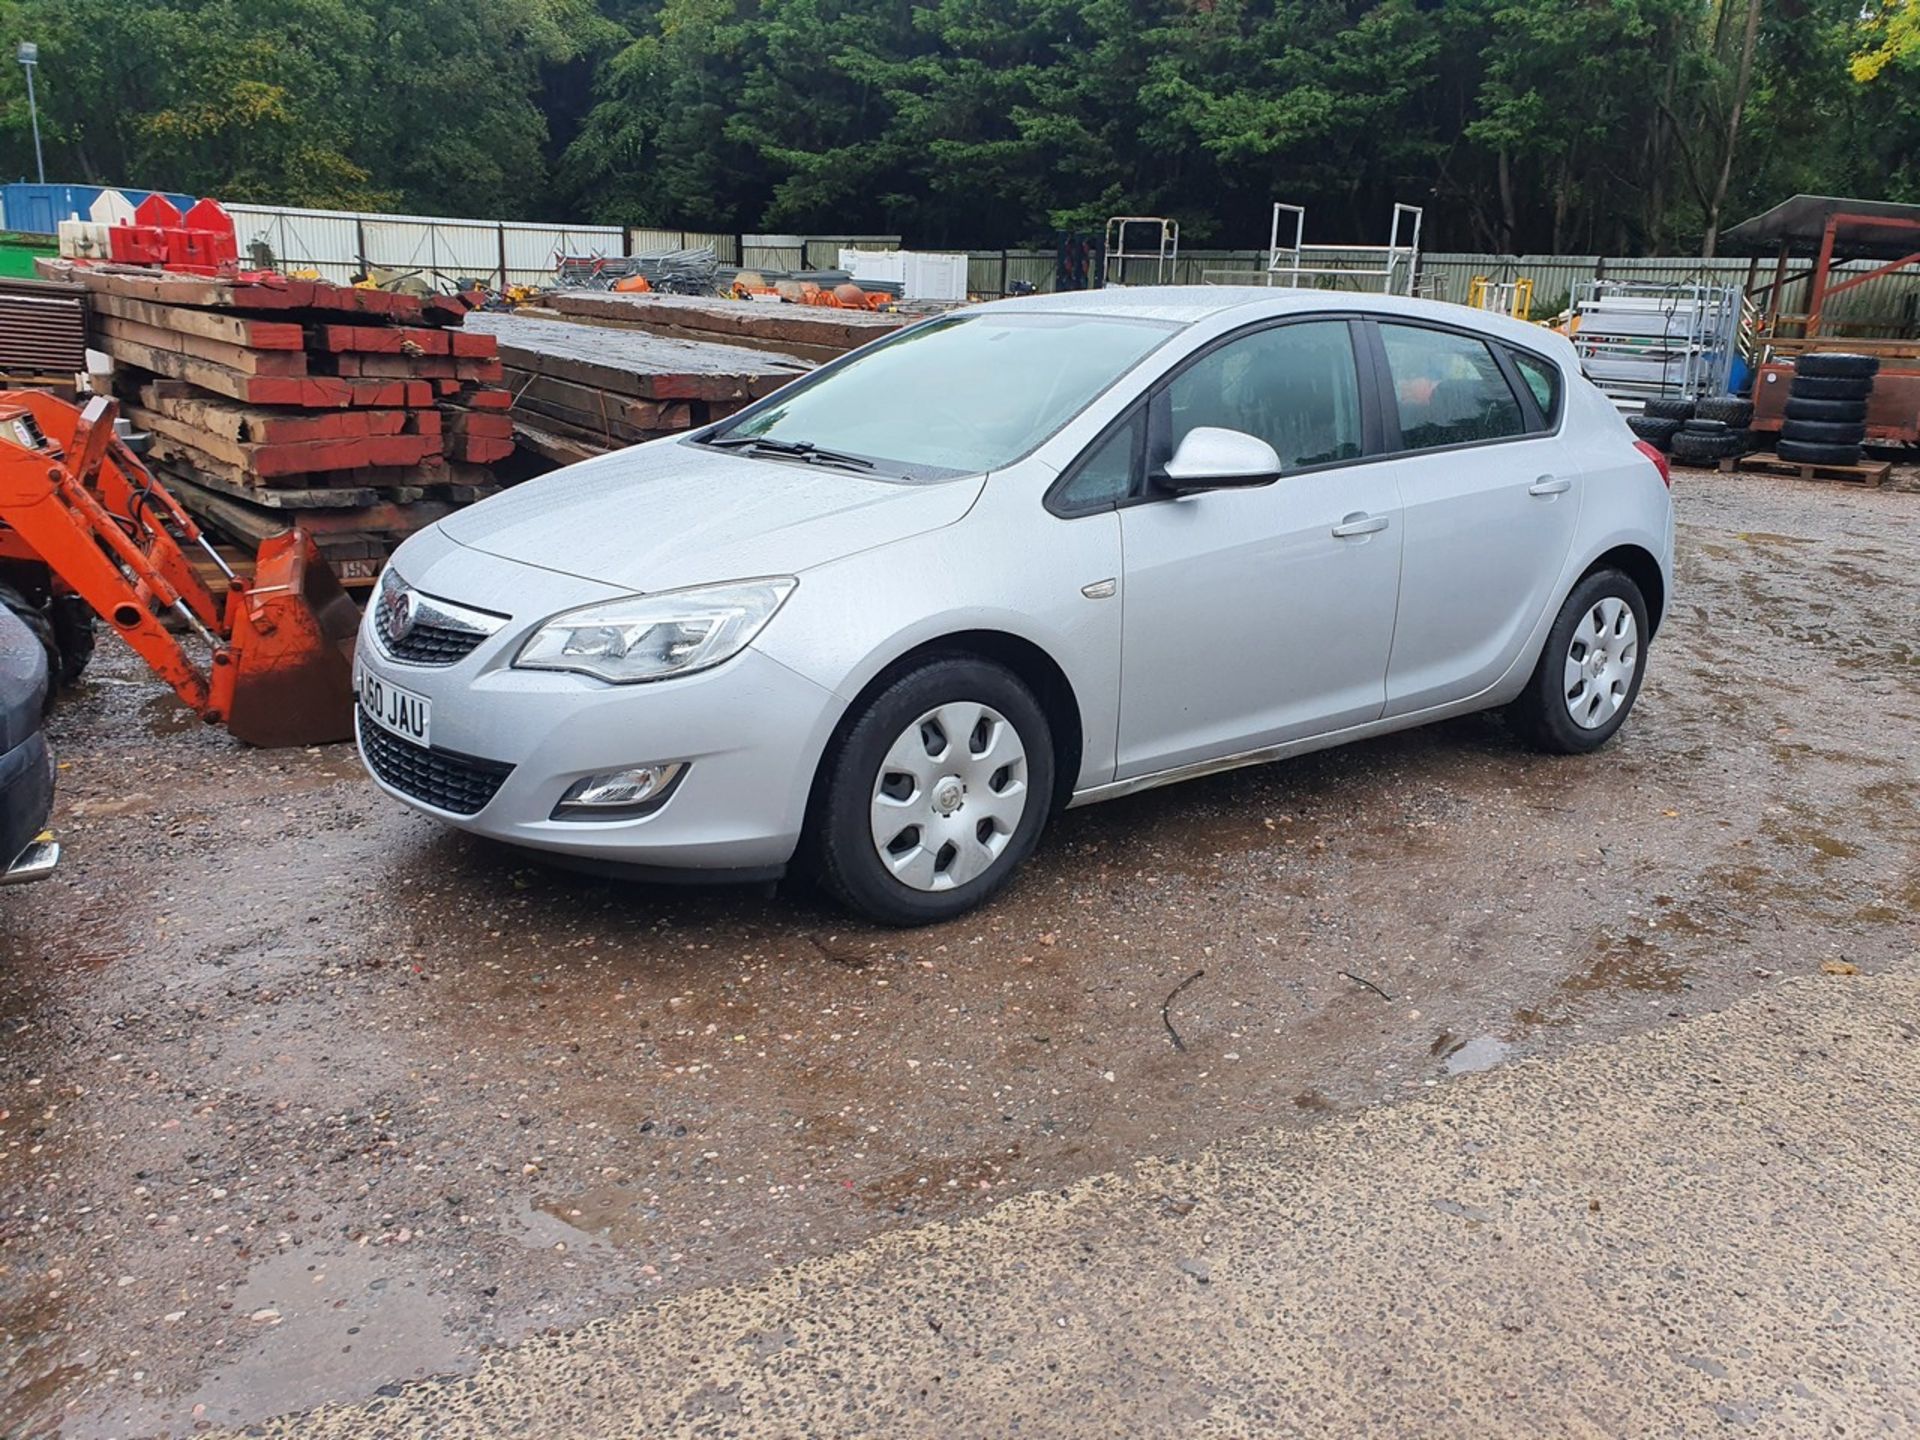 10/60 VAUXHALL ASTRA EXCLUSIV 113 - 1598cc 5dr Hatchback (Silver, 58k) - Image 15 of 23